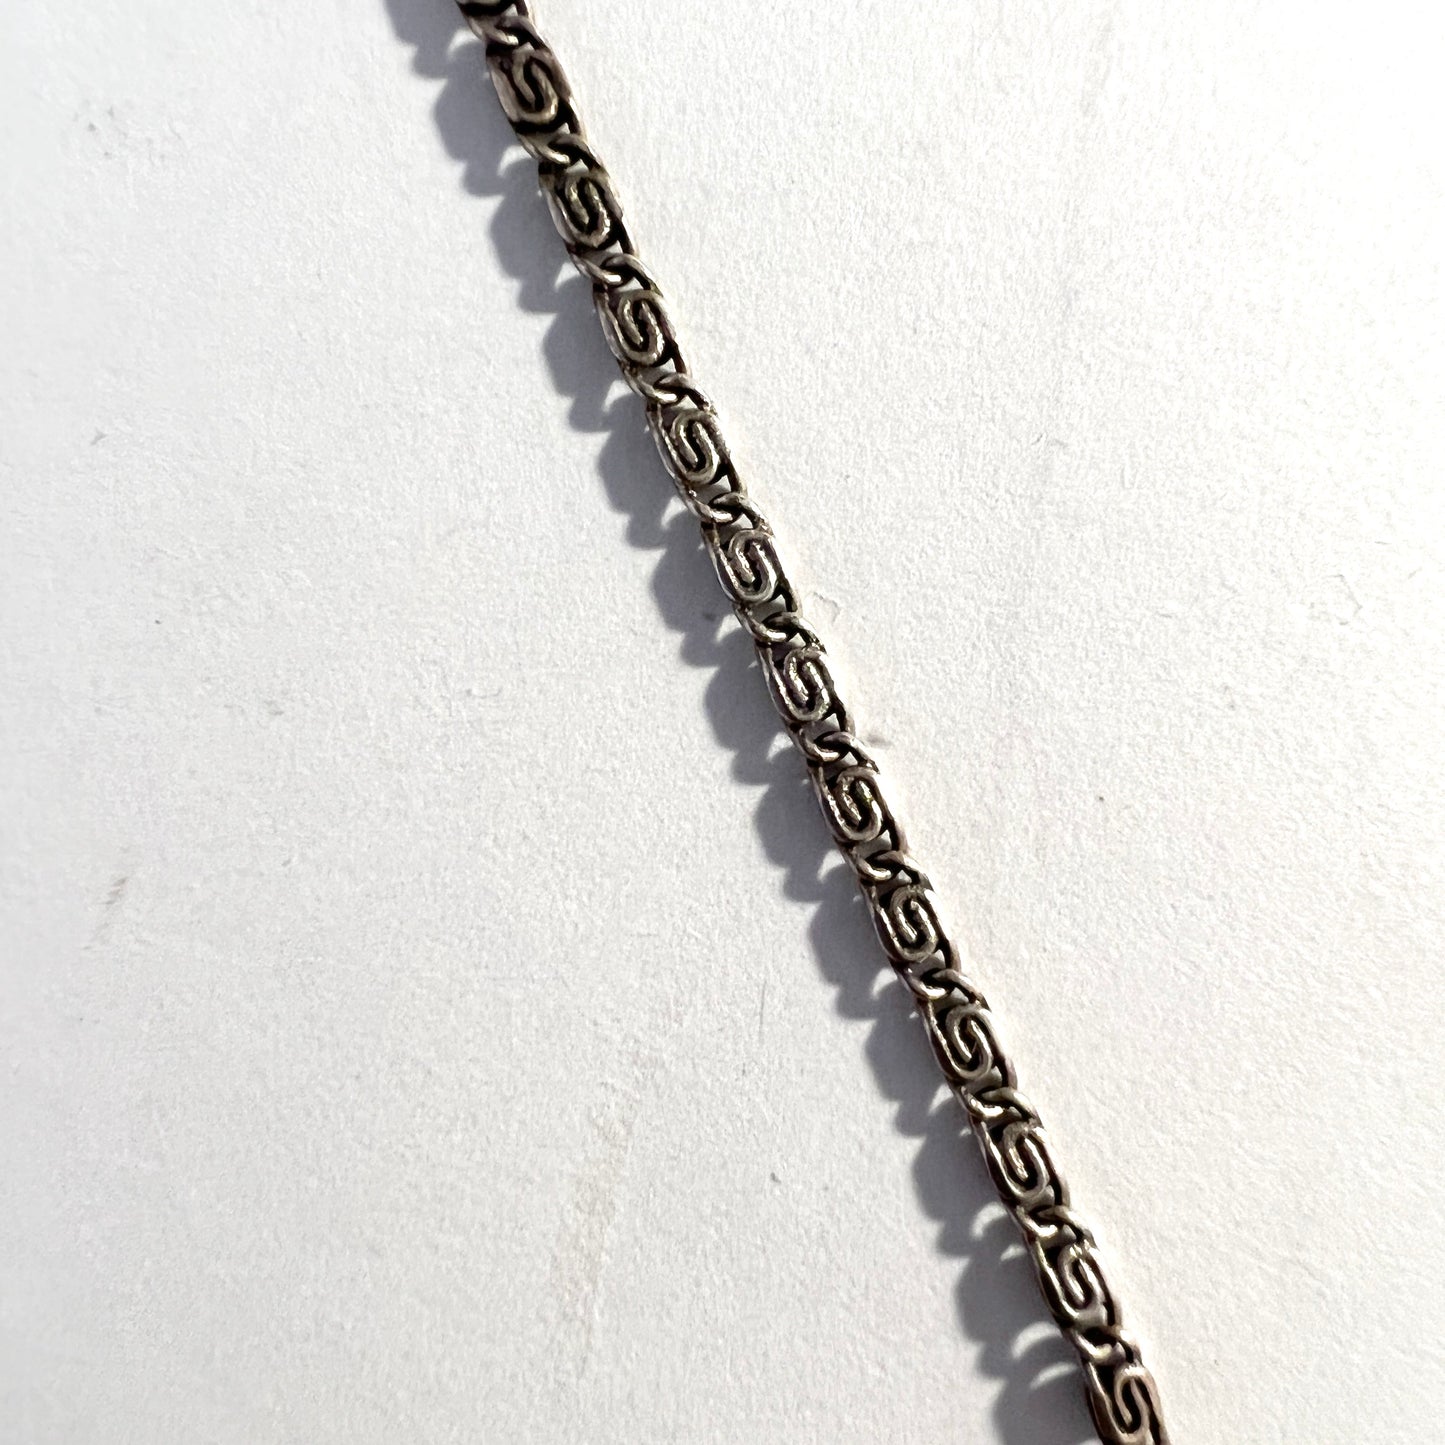 Sweden 1930-40s. Solid 830 Silver Paste Stone Necklace.